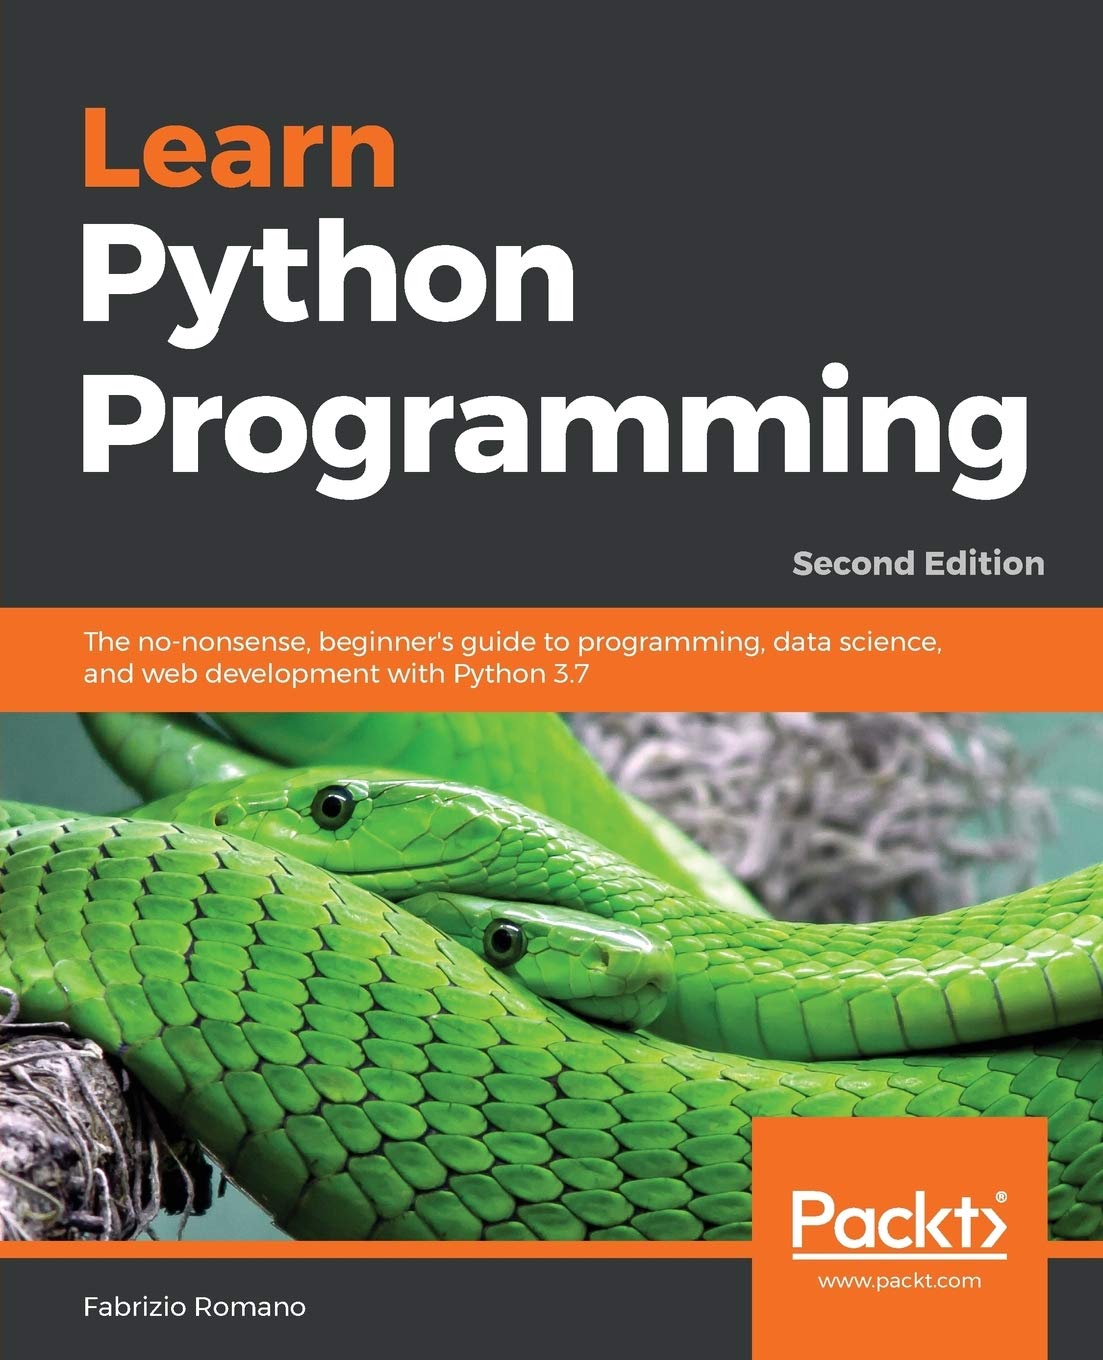 Learn Python Programming: The no-nonsense, beginner's guide to programming, data science, and web development with Python 3.7, 2nd Edition